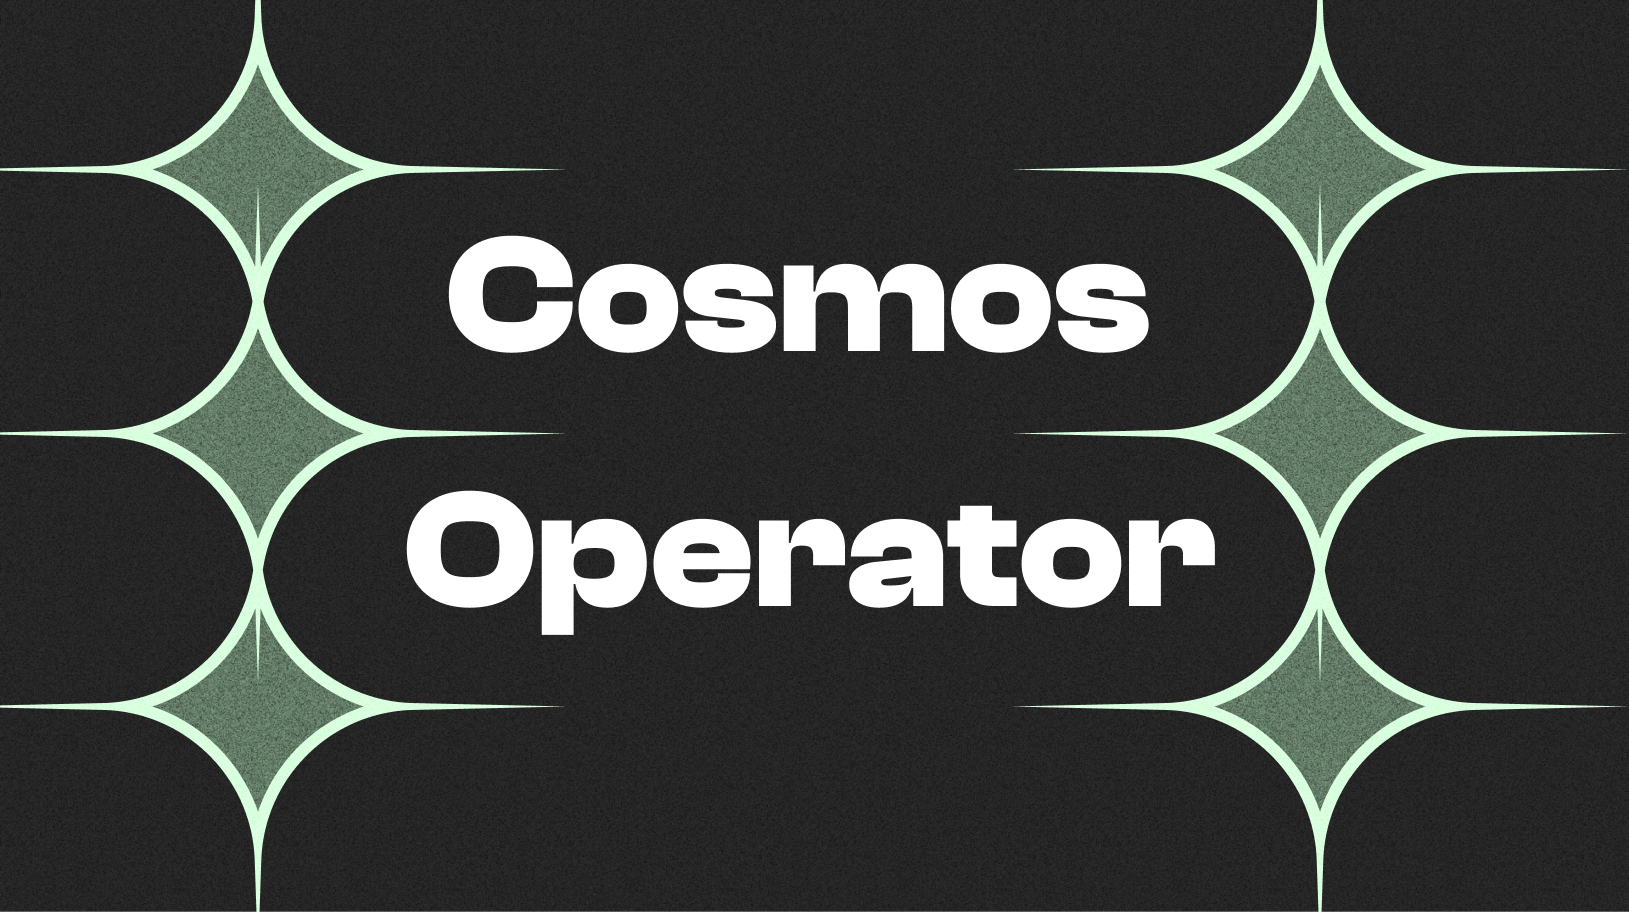 Introducing the Cosmos Operator